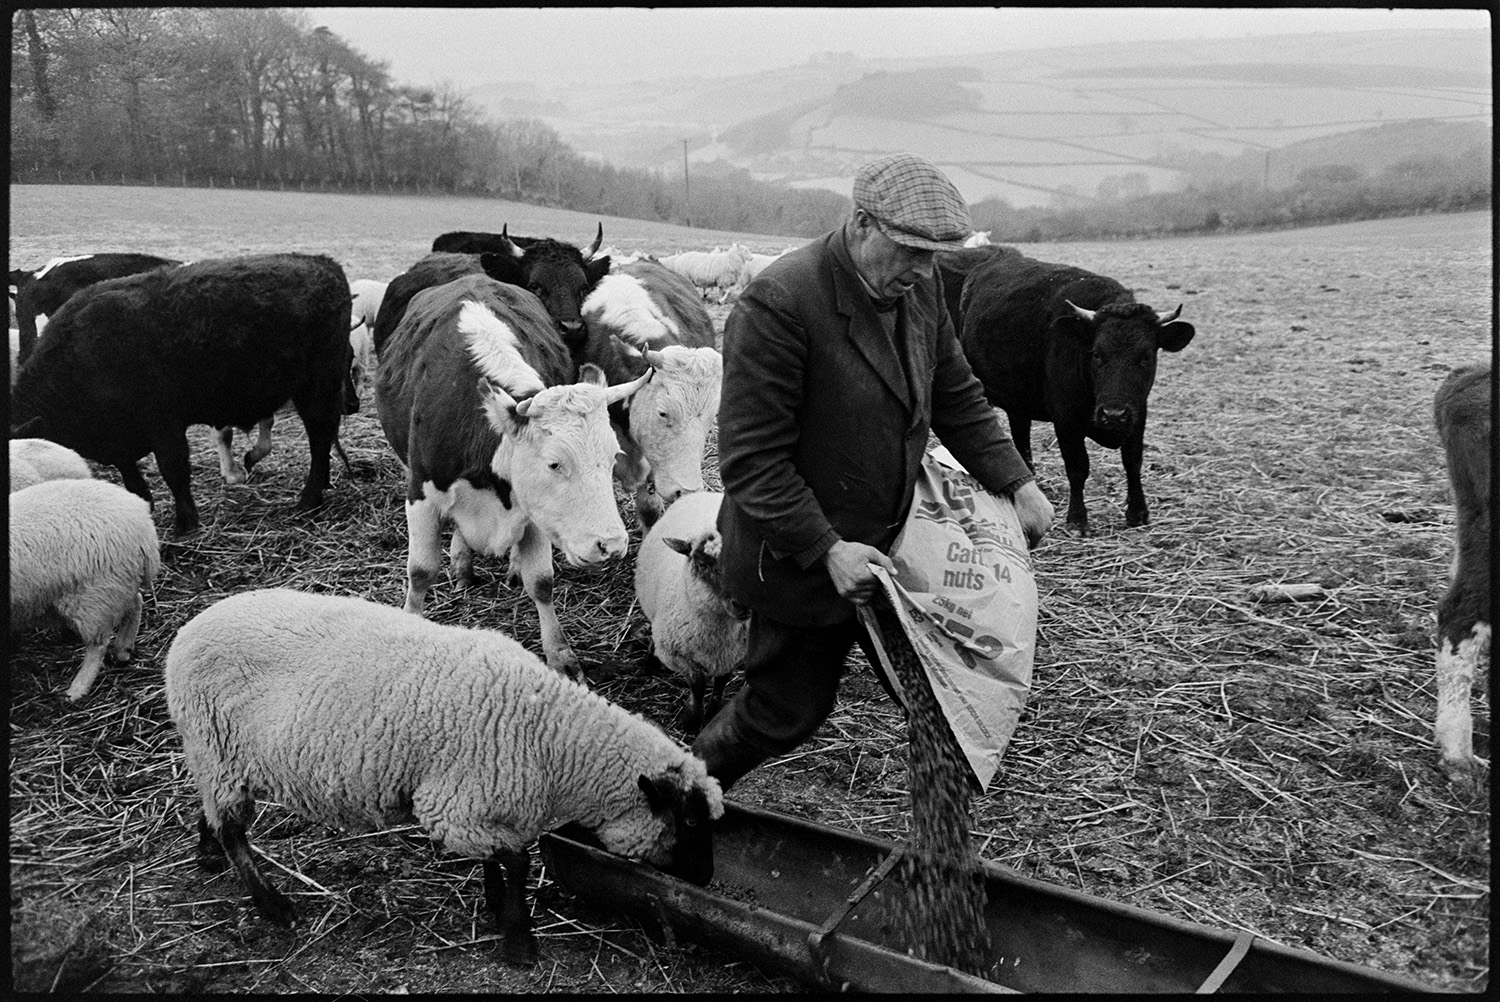 Farmer feeding sheep and cattle. 
[George Ayre filling a trough with feed for sheep and cattle in a field at Ashwell, Dolton.]